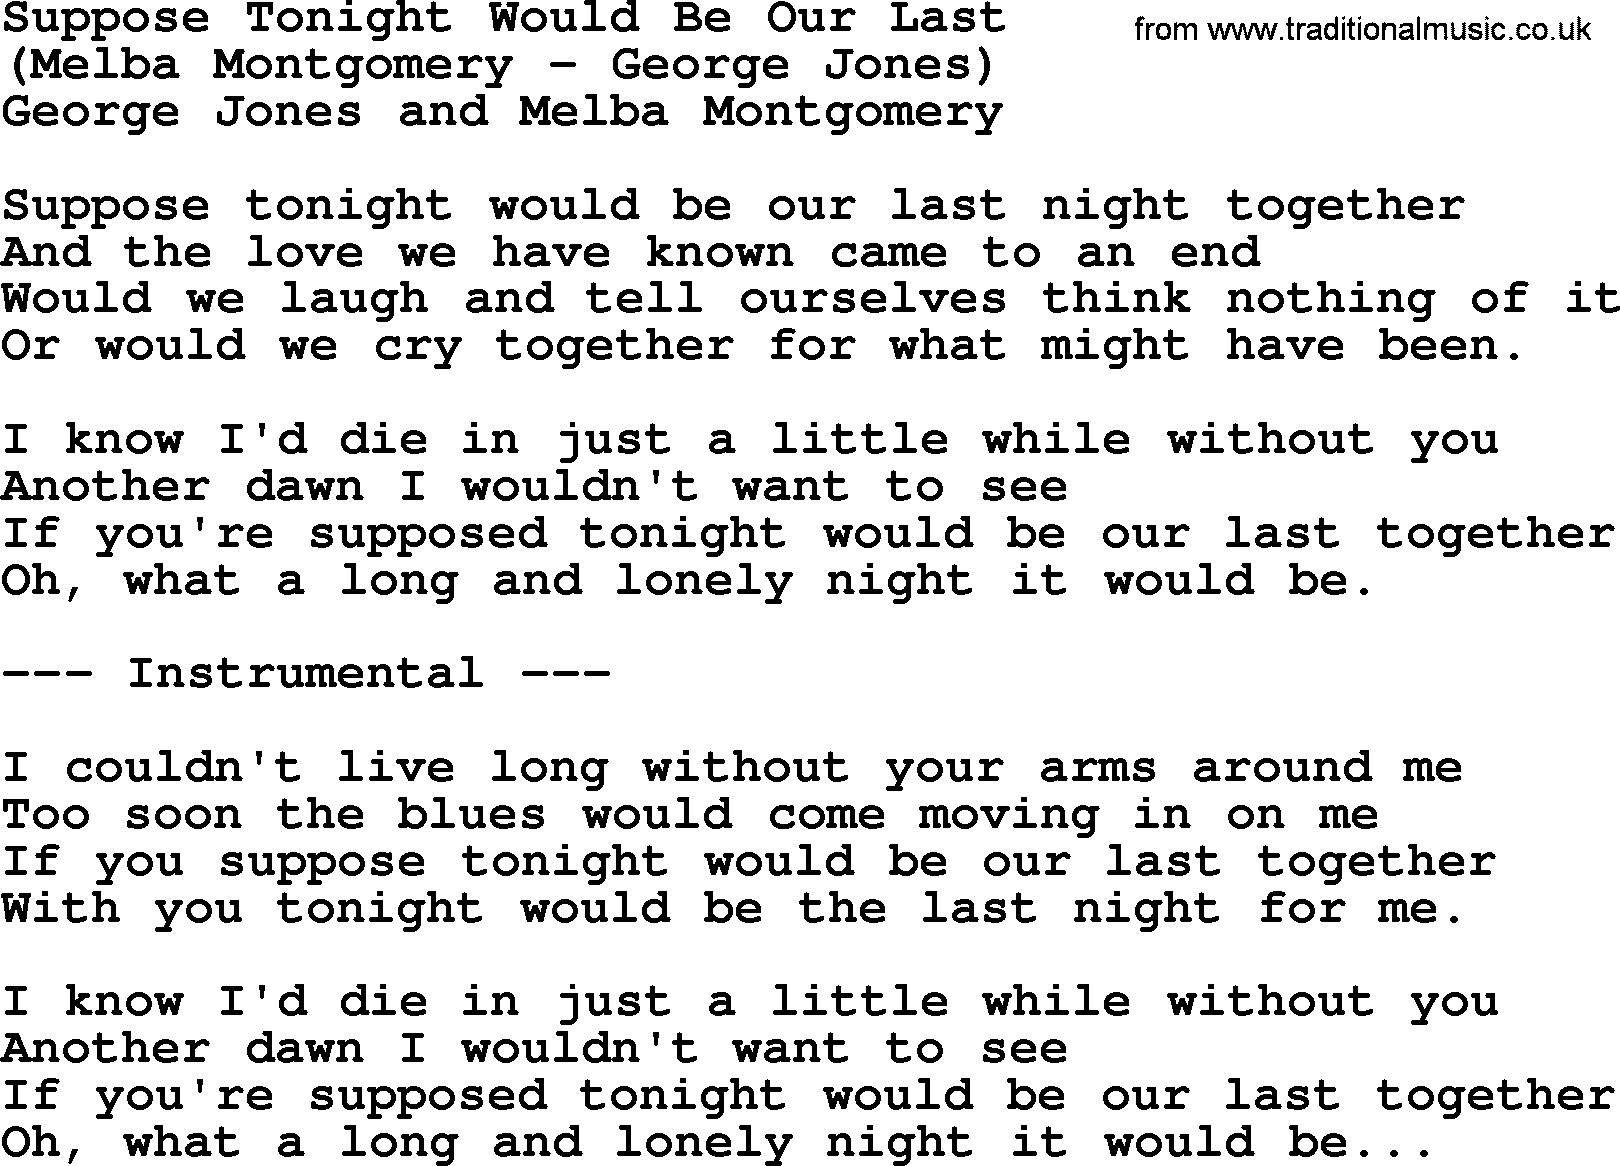 George Jones song: Suppose Tonight Would Be Our Last, lyrics